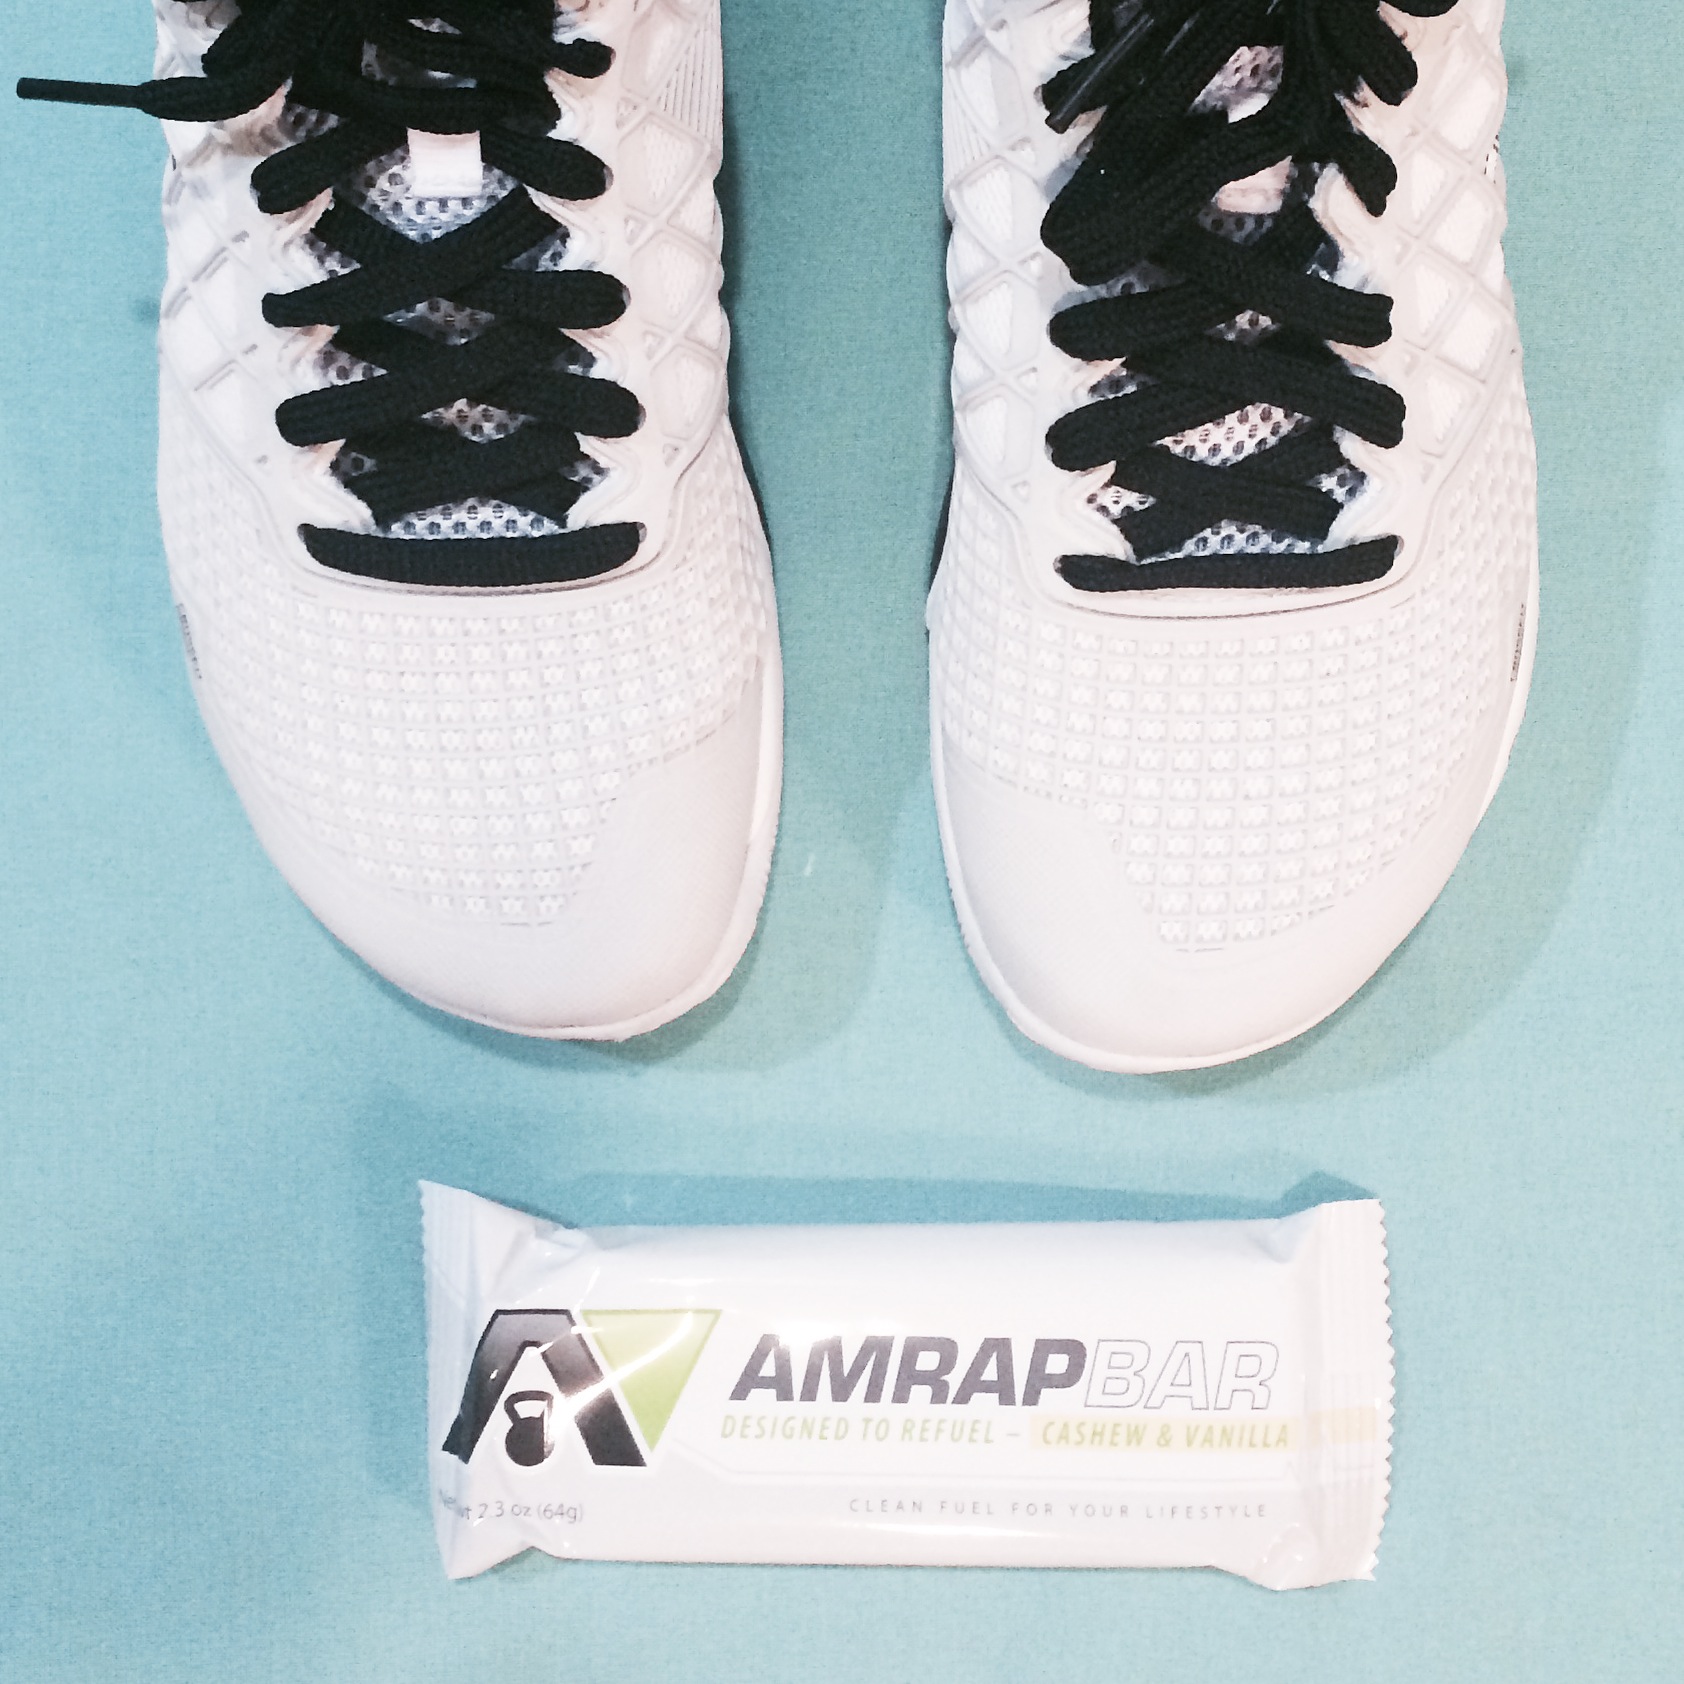 Raise the Bar (AMRAP Bar Review and Giveaway)